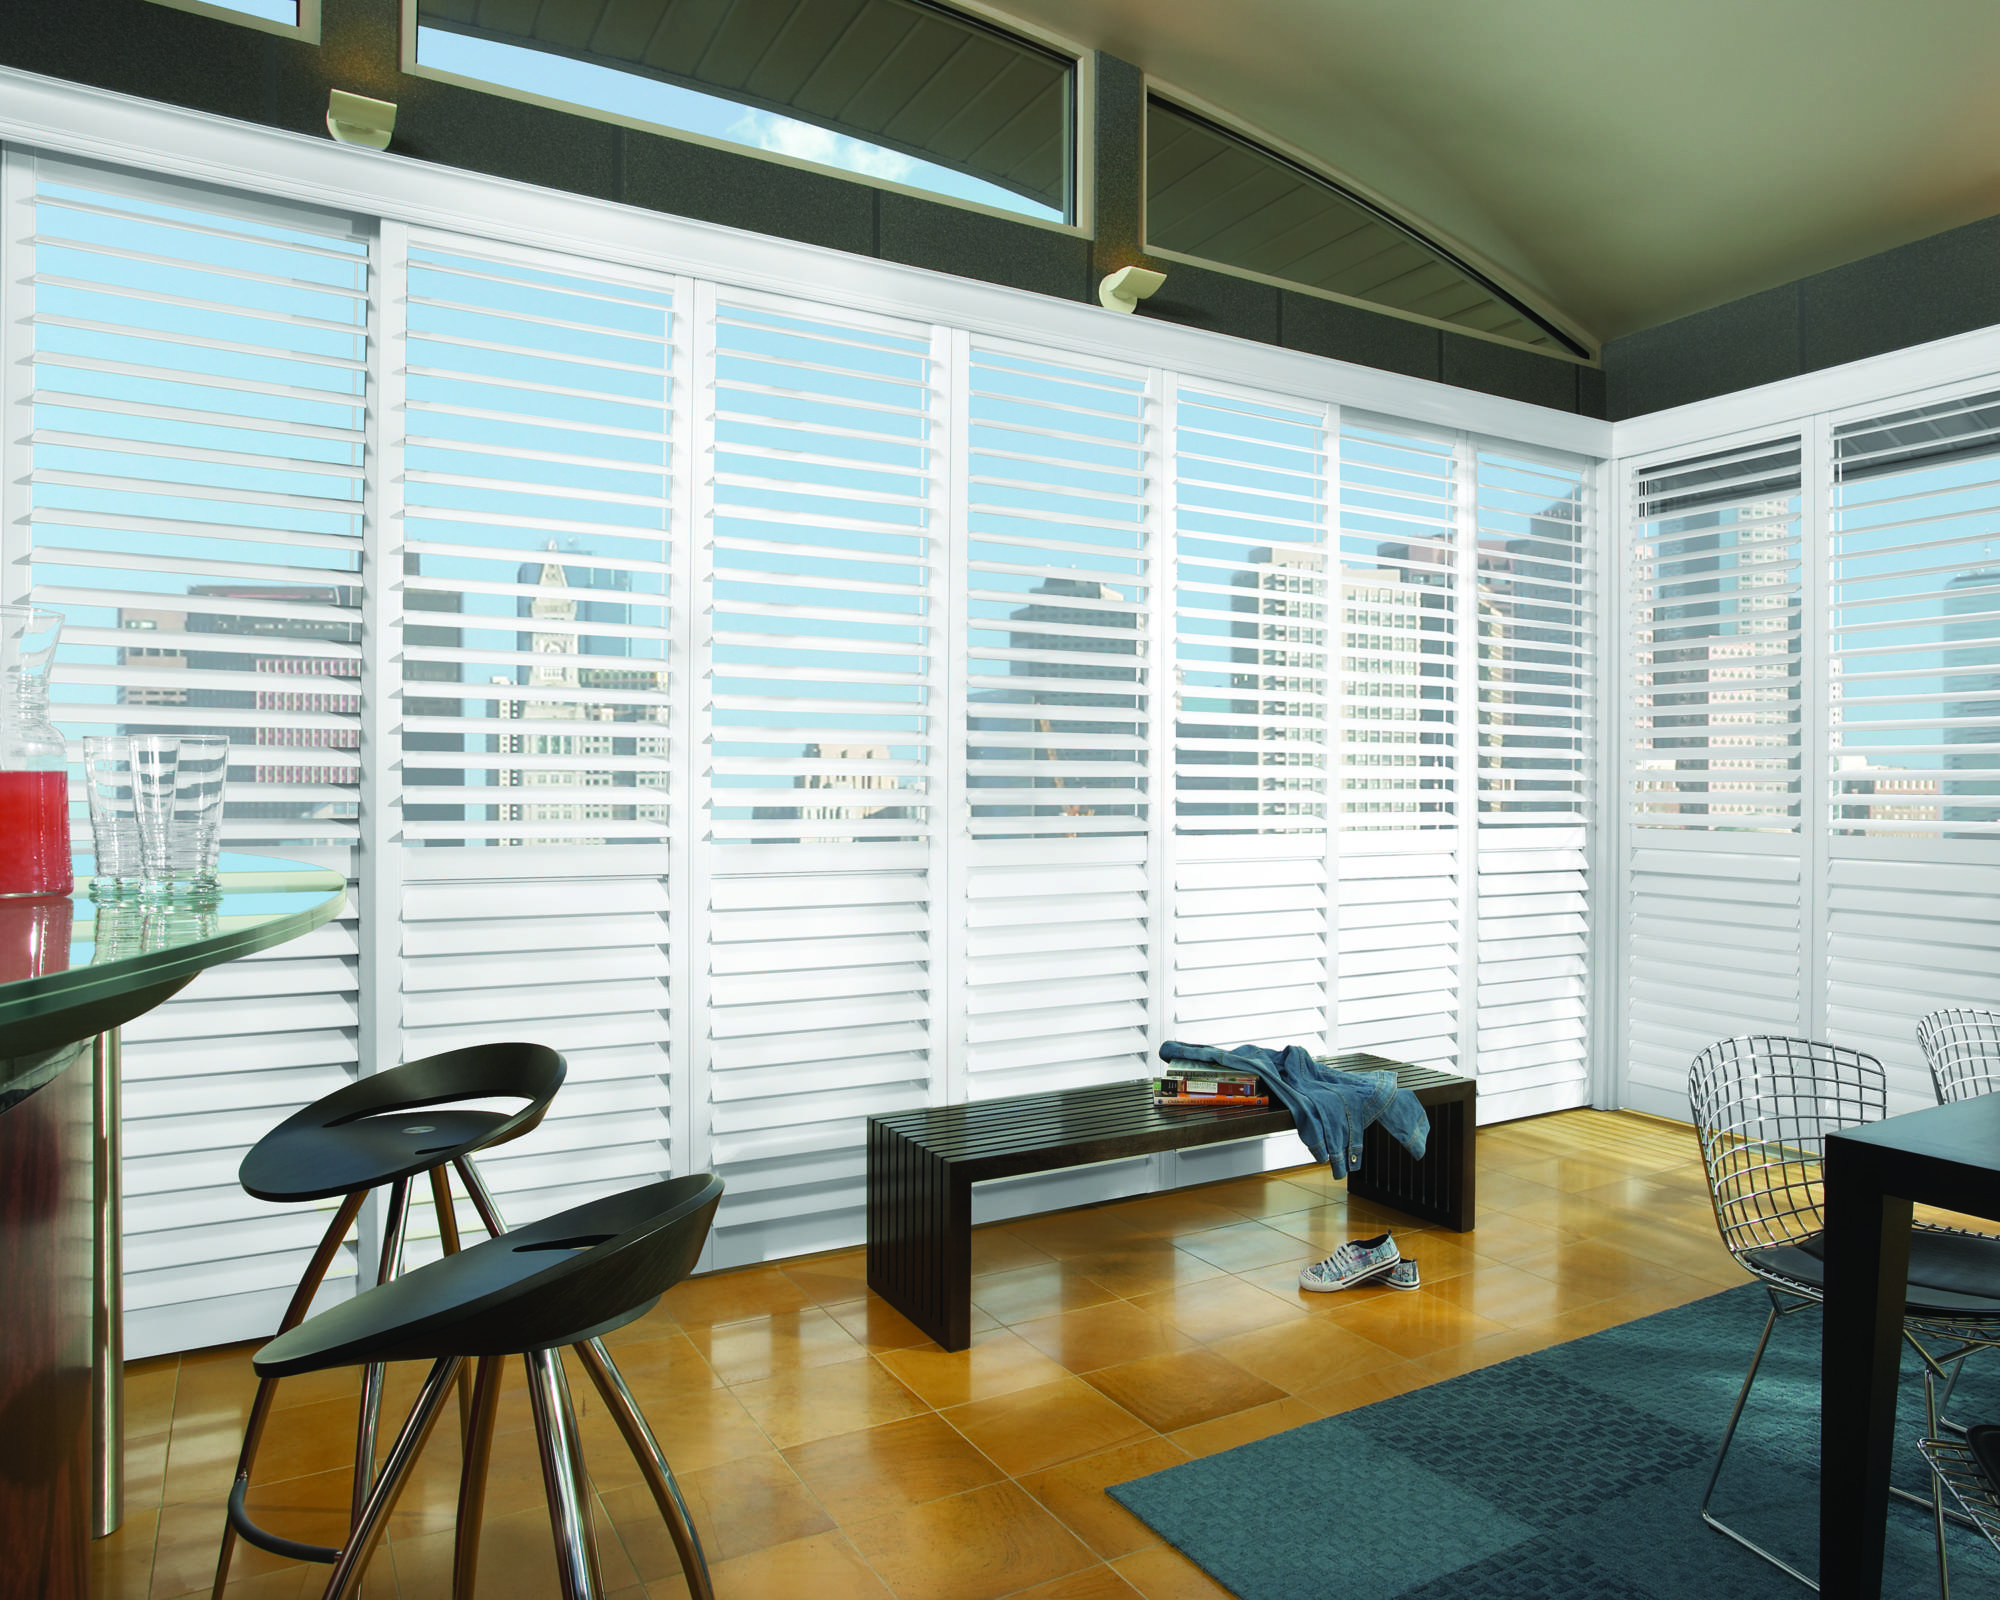 Oasis 2700 Patio Sun Shades from Exterior